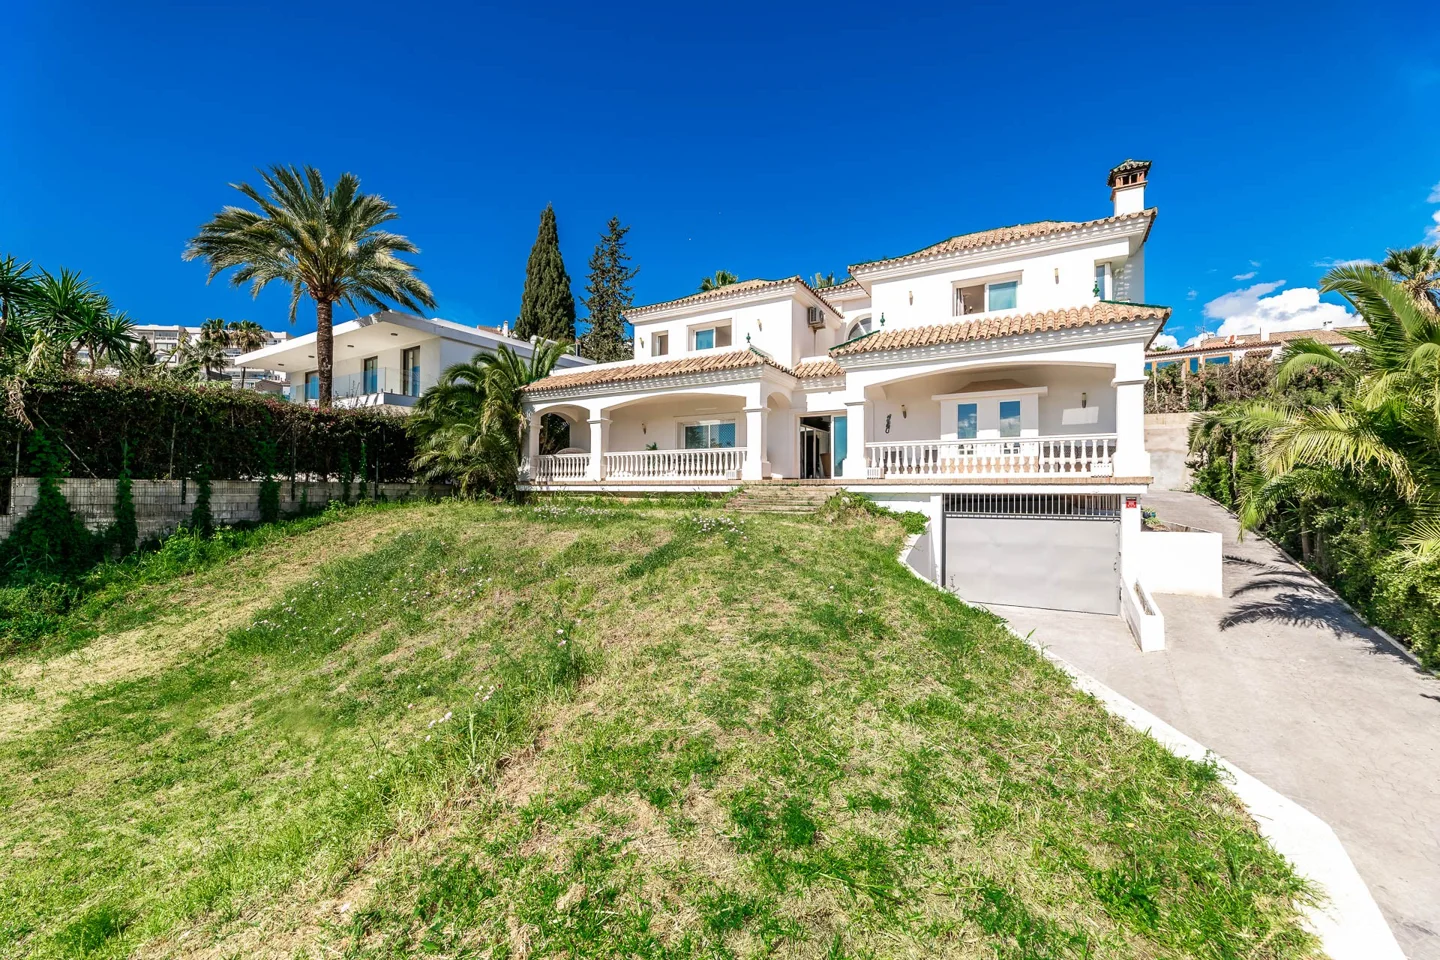 Beautiful Villa in Nueva Andalucia, nearby Puerto Banus, investment opportunity.